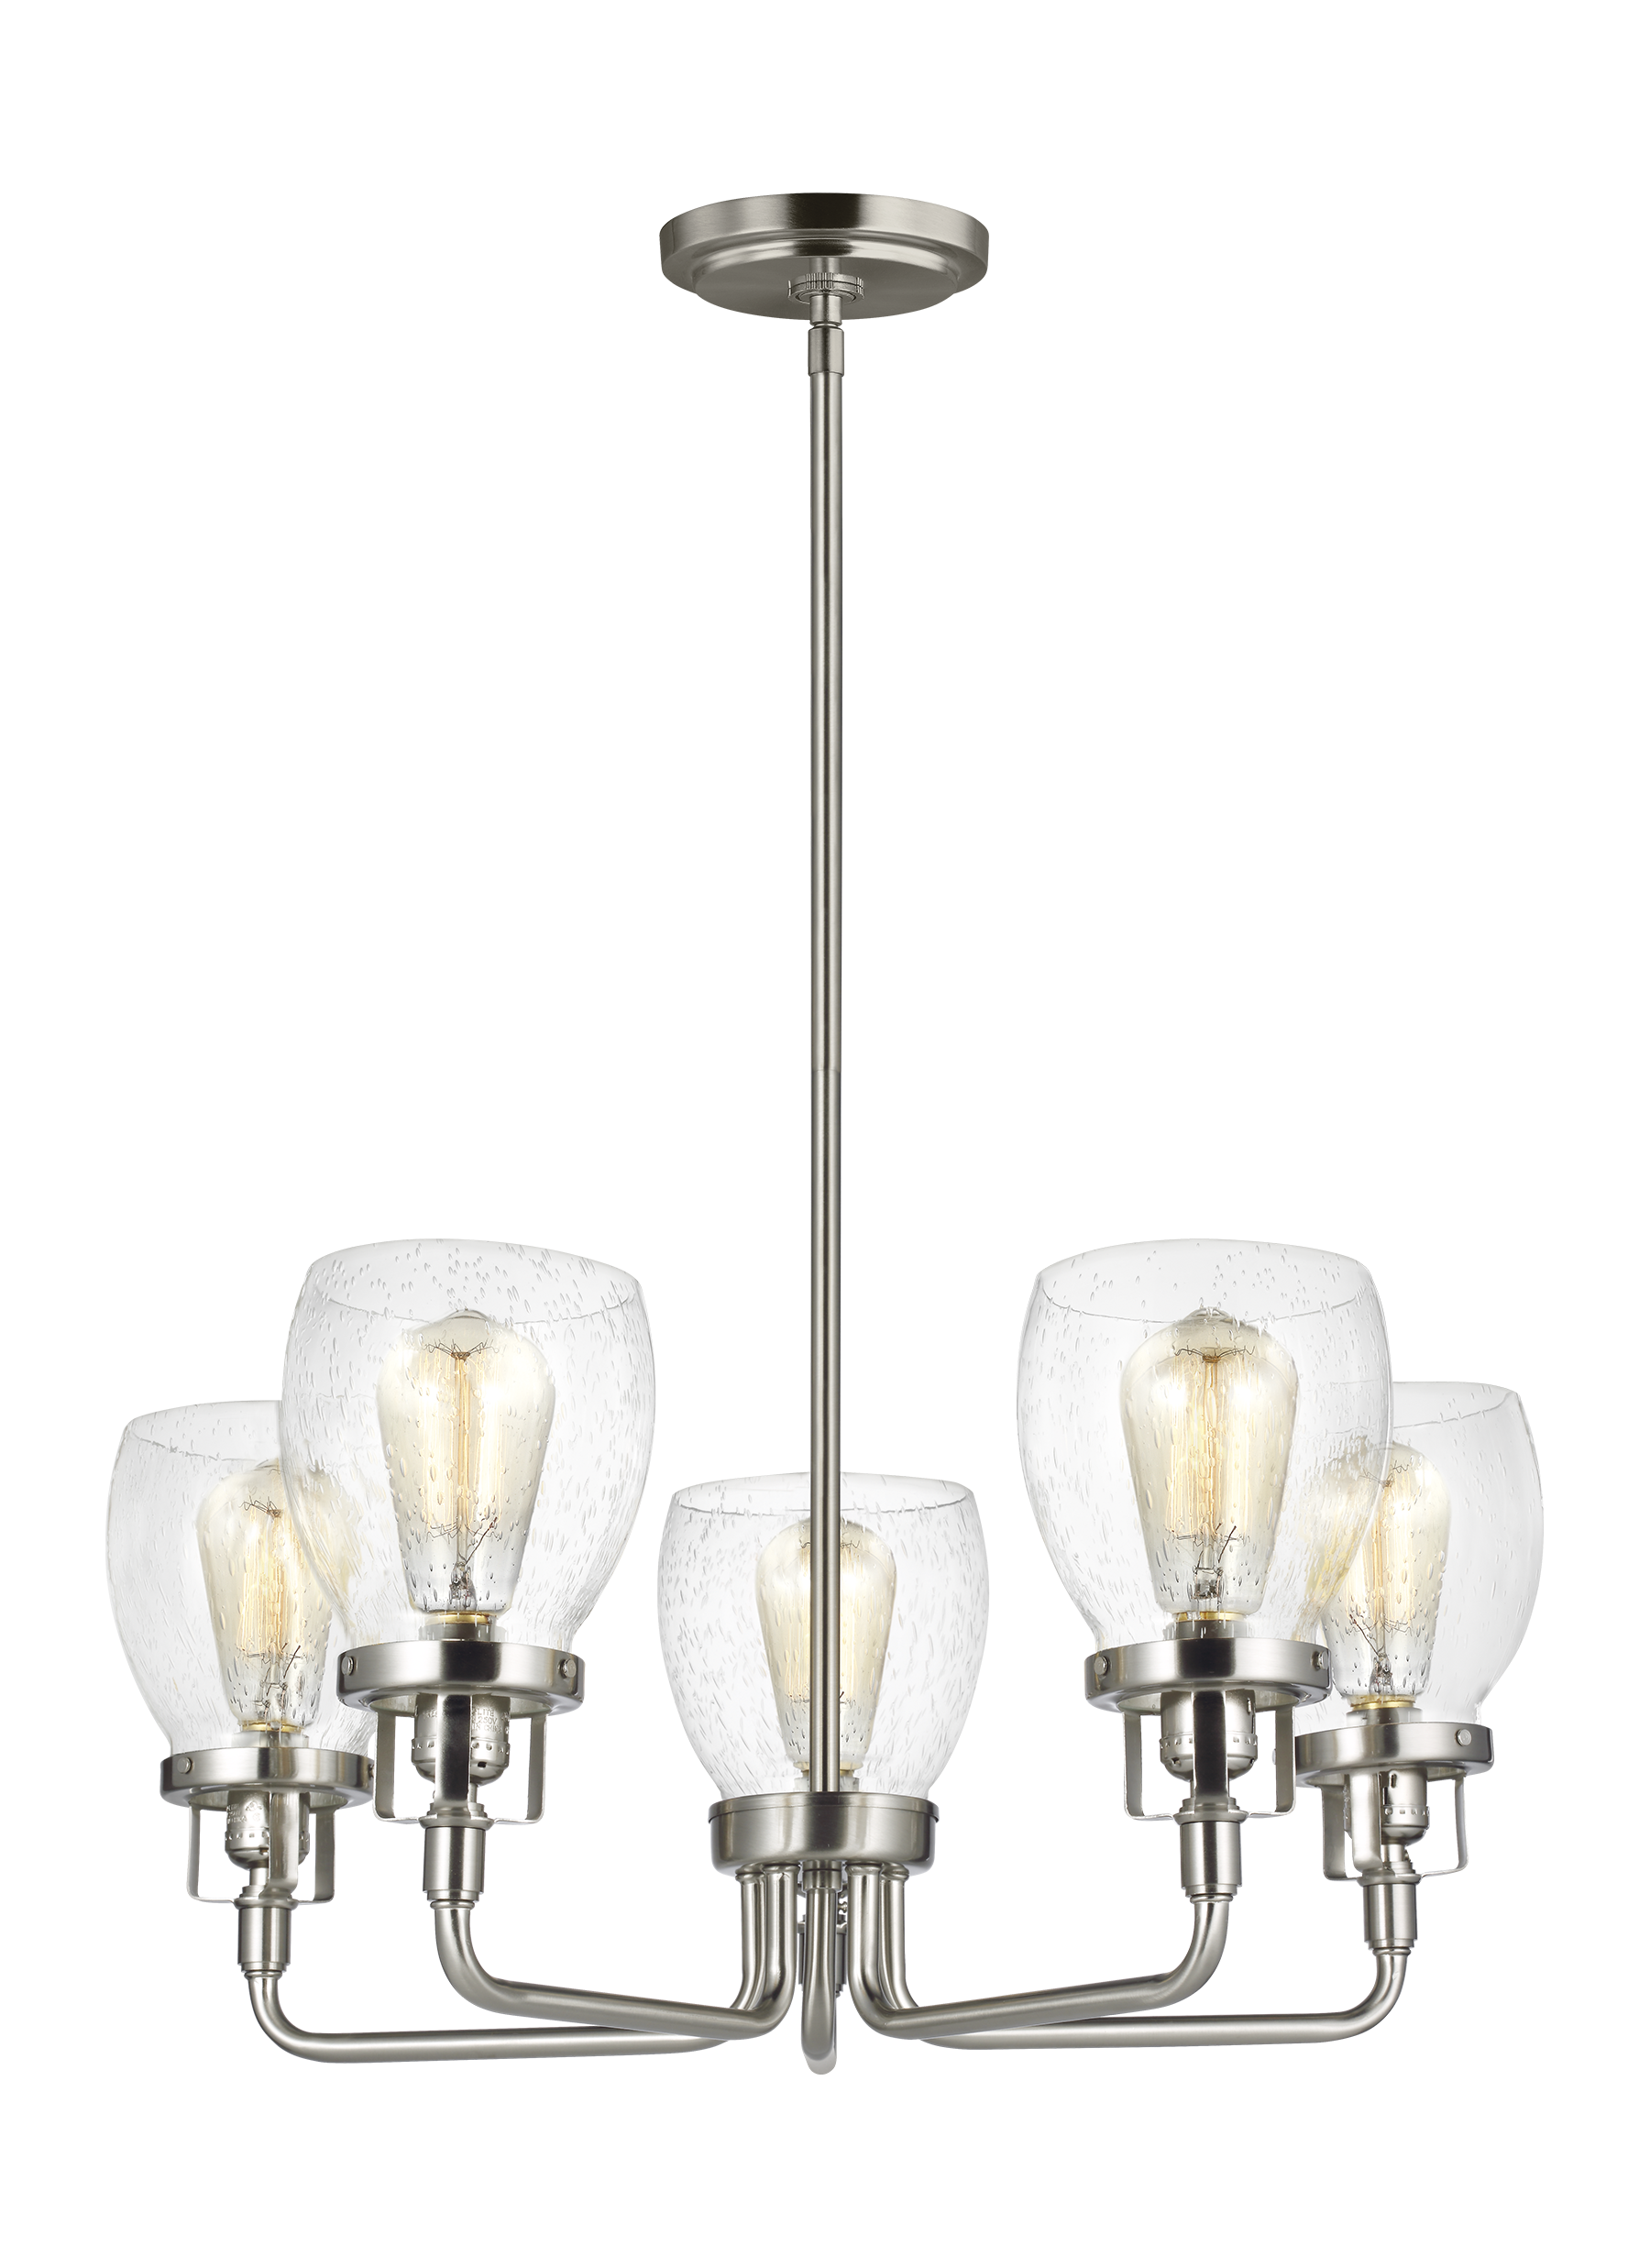 Belton transitional 5-light indoor dimmable ceiling up chandelier pendant light in brushed nickel silver finish with clear...